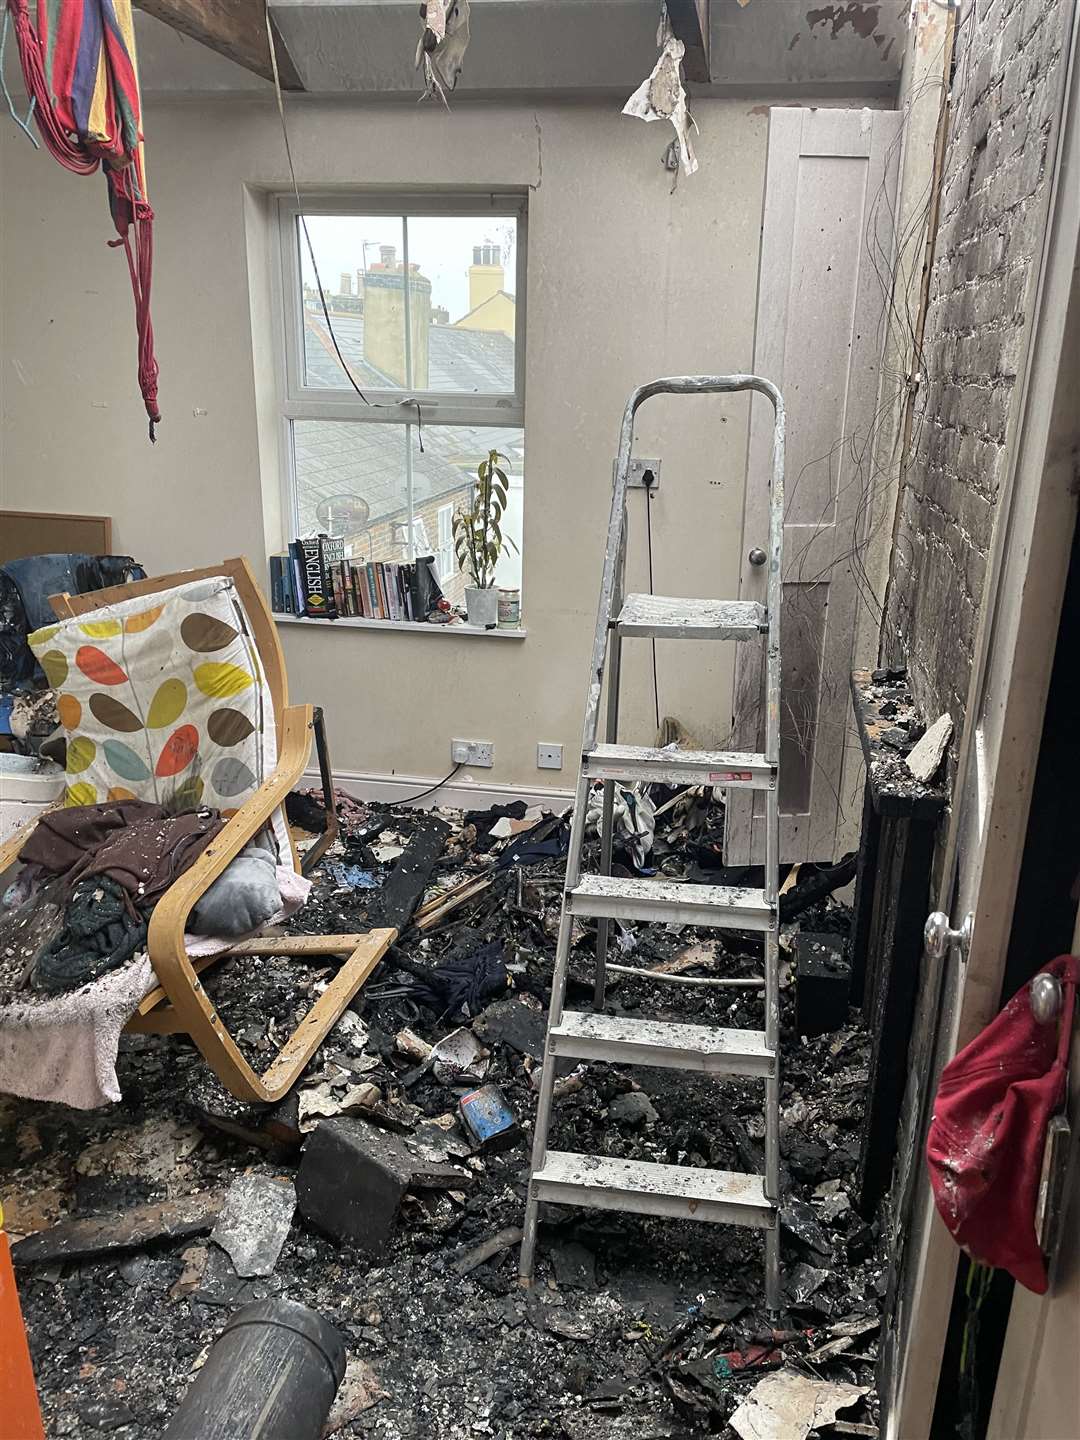 One of the rooms strewn with debris after the fire. Picture from Zoey Cross